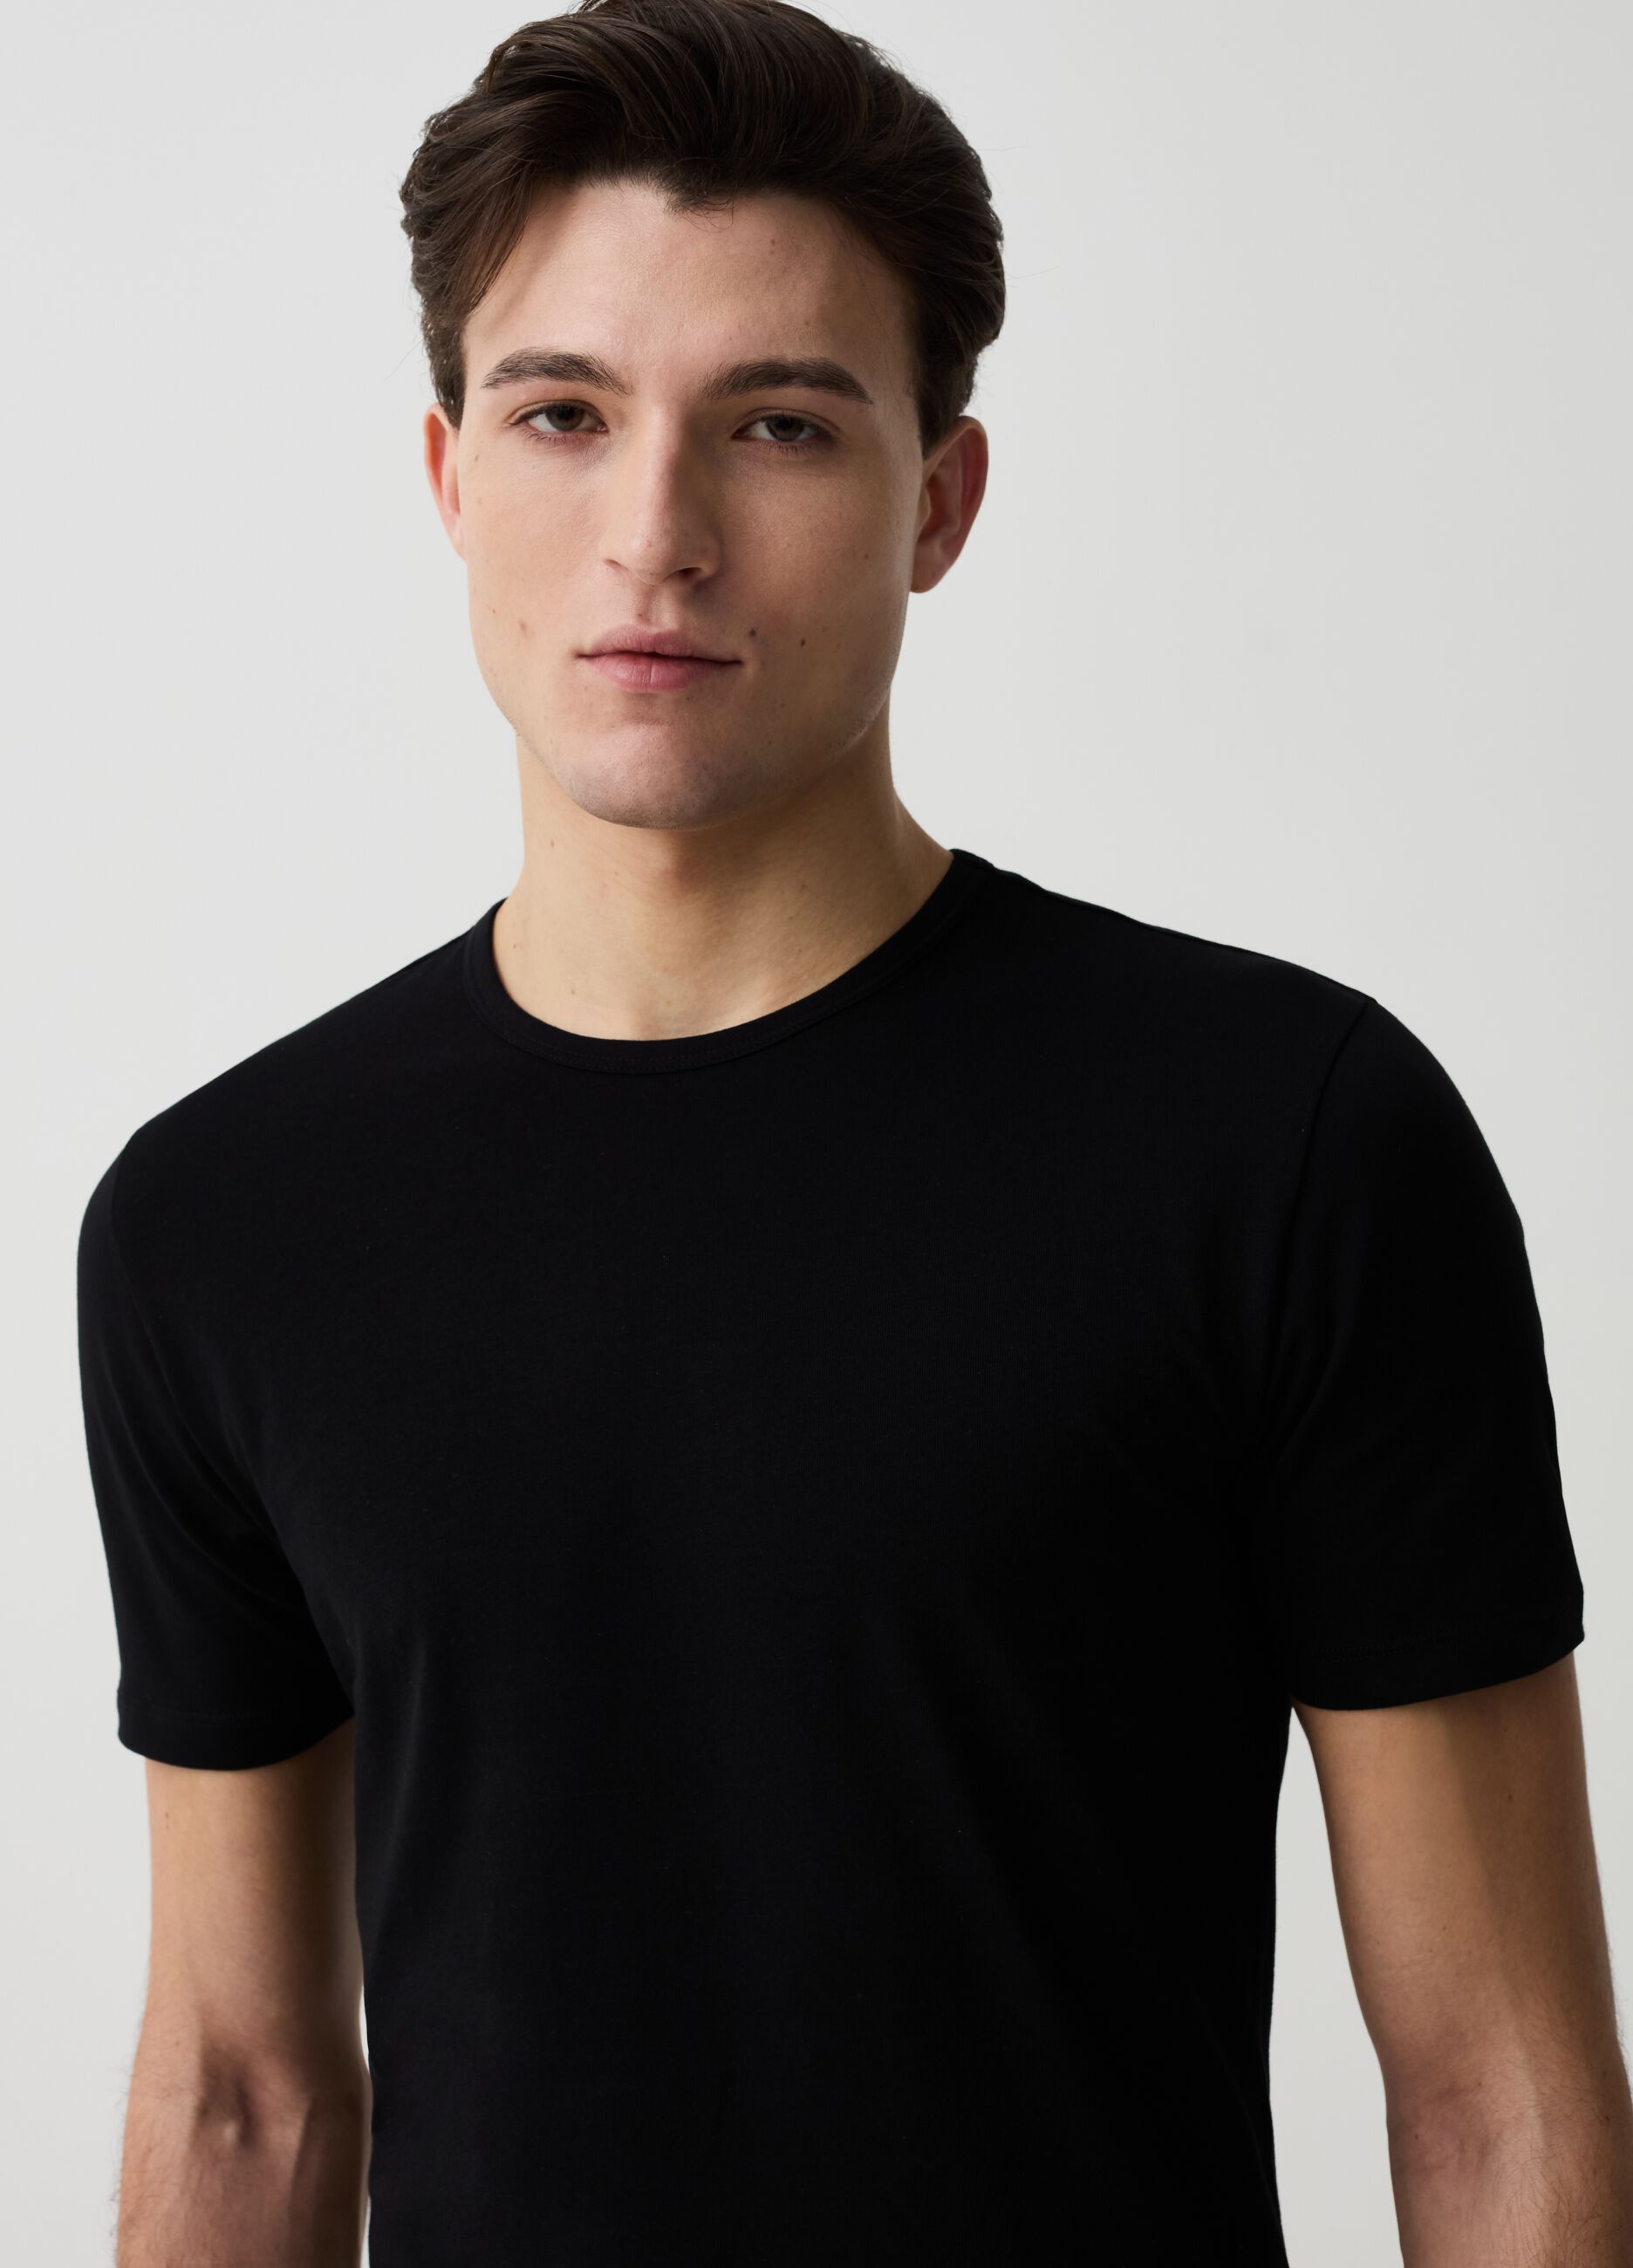 Two-pack undershirts with round neck